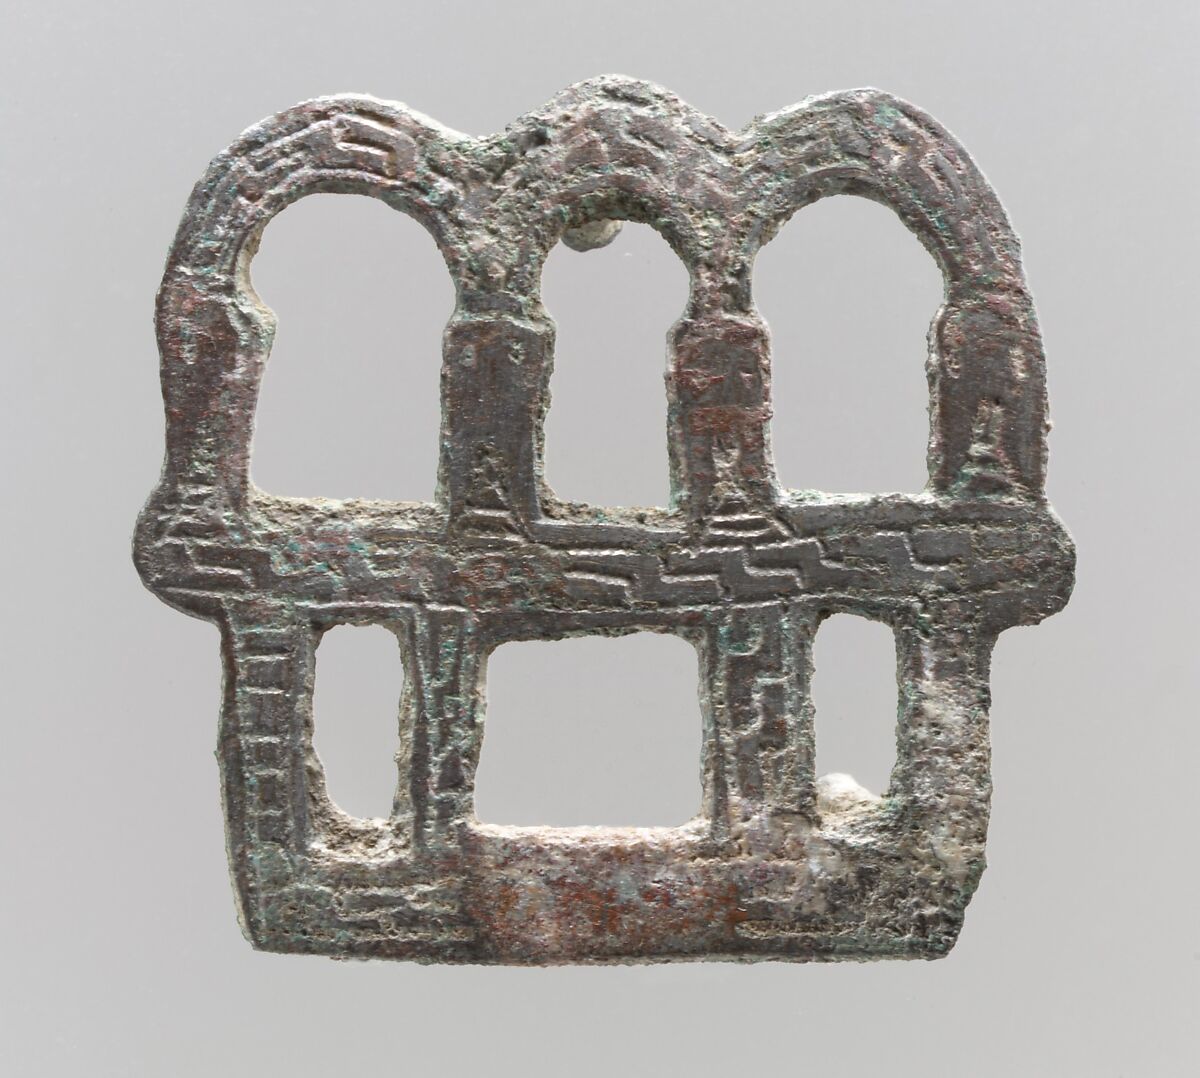 Openwork Plaque, Copper alloy, silvered or  "tinned" surface, Frankish 